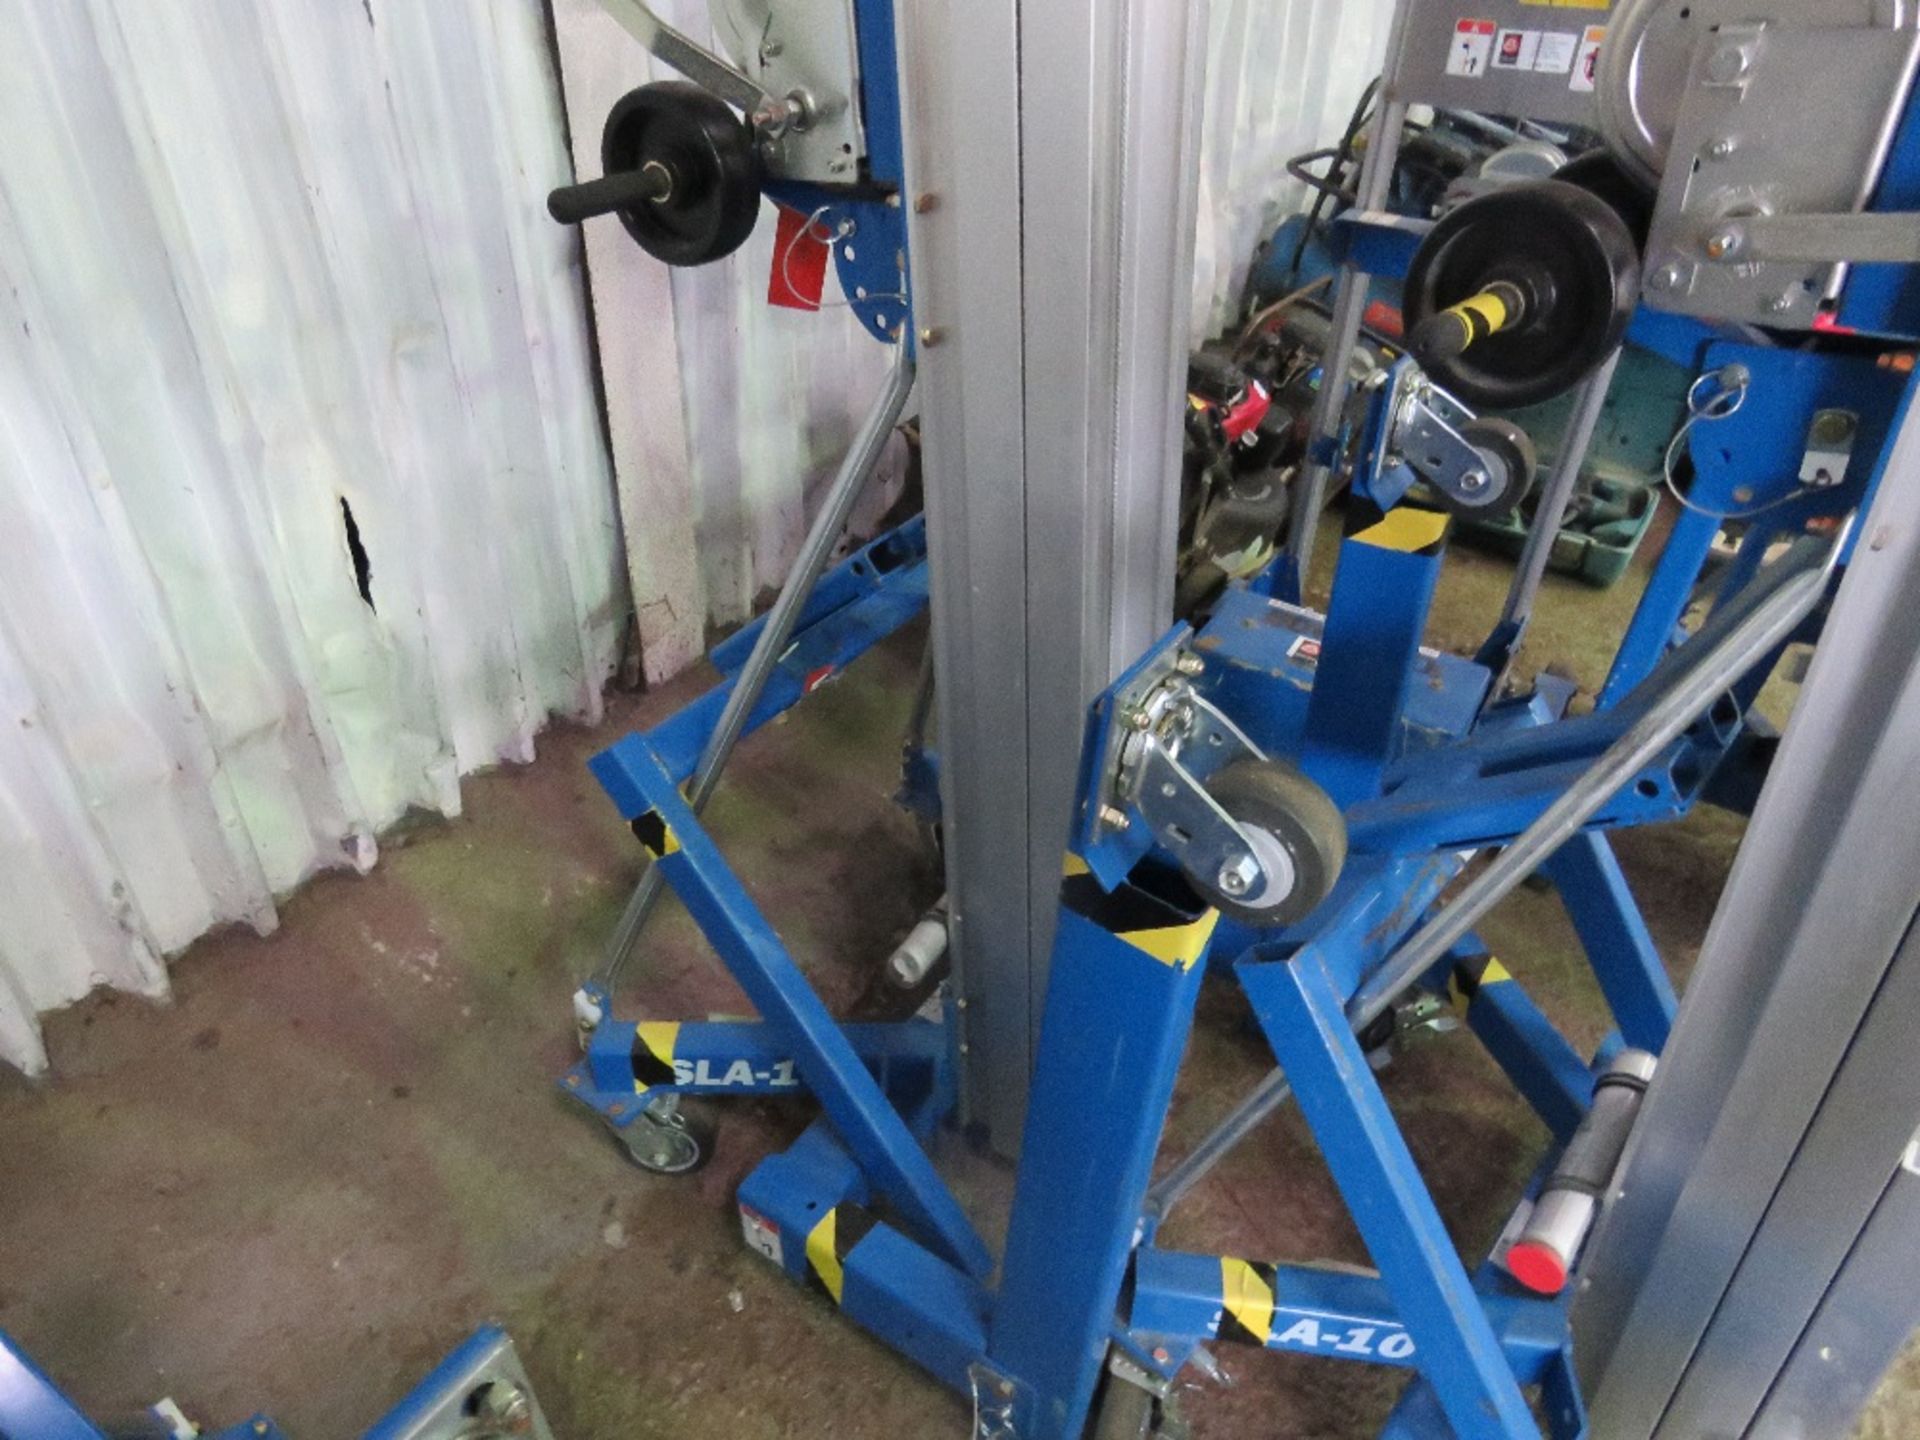 GENIE SLA10 2 SECTION CABLE OPERATED MATERIAL LIFT HOIST UNIT C/W FORKS, YEAR 2018 BUILD, DIRECT EX